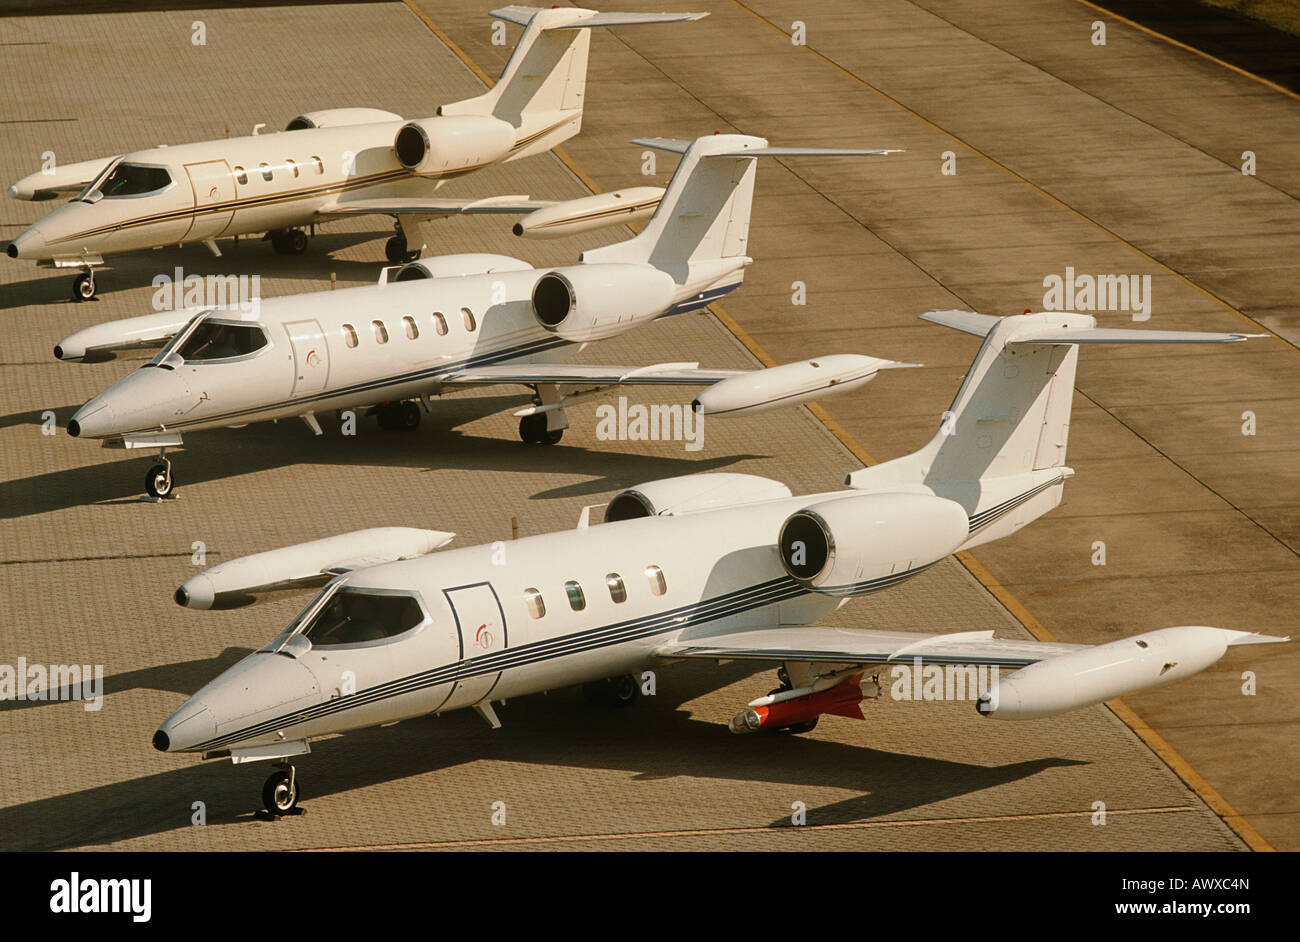 Three jet plains at airport, elevated view Stock Photo